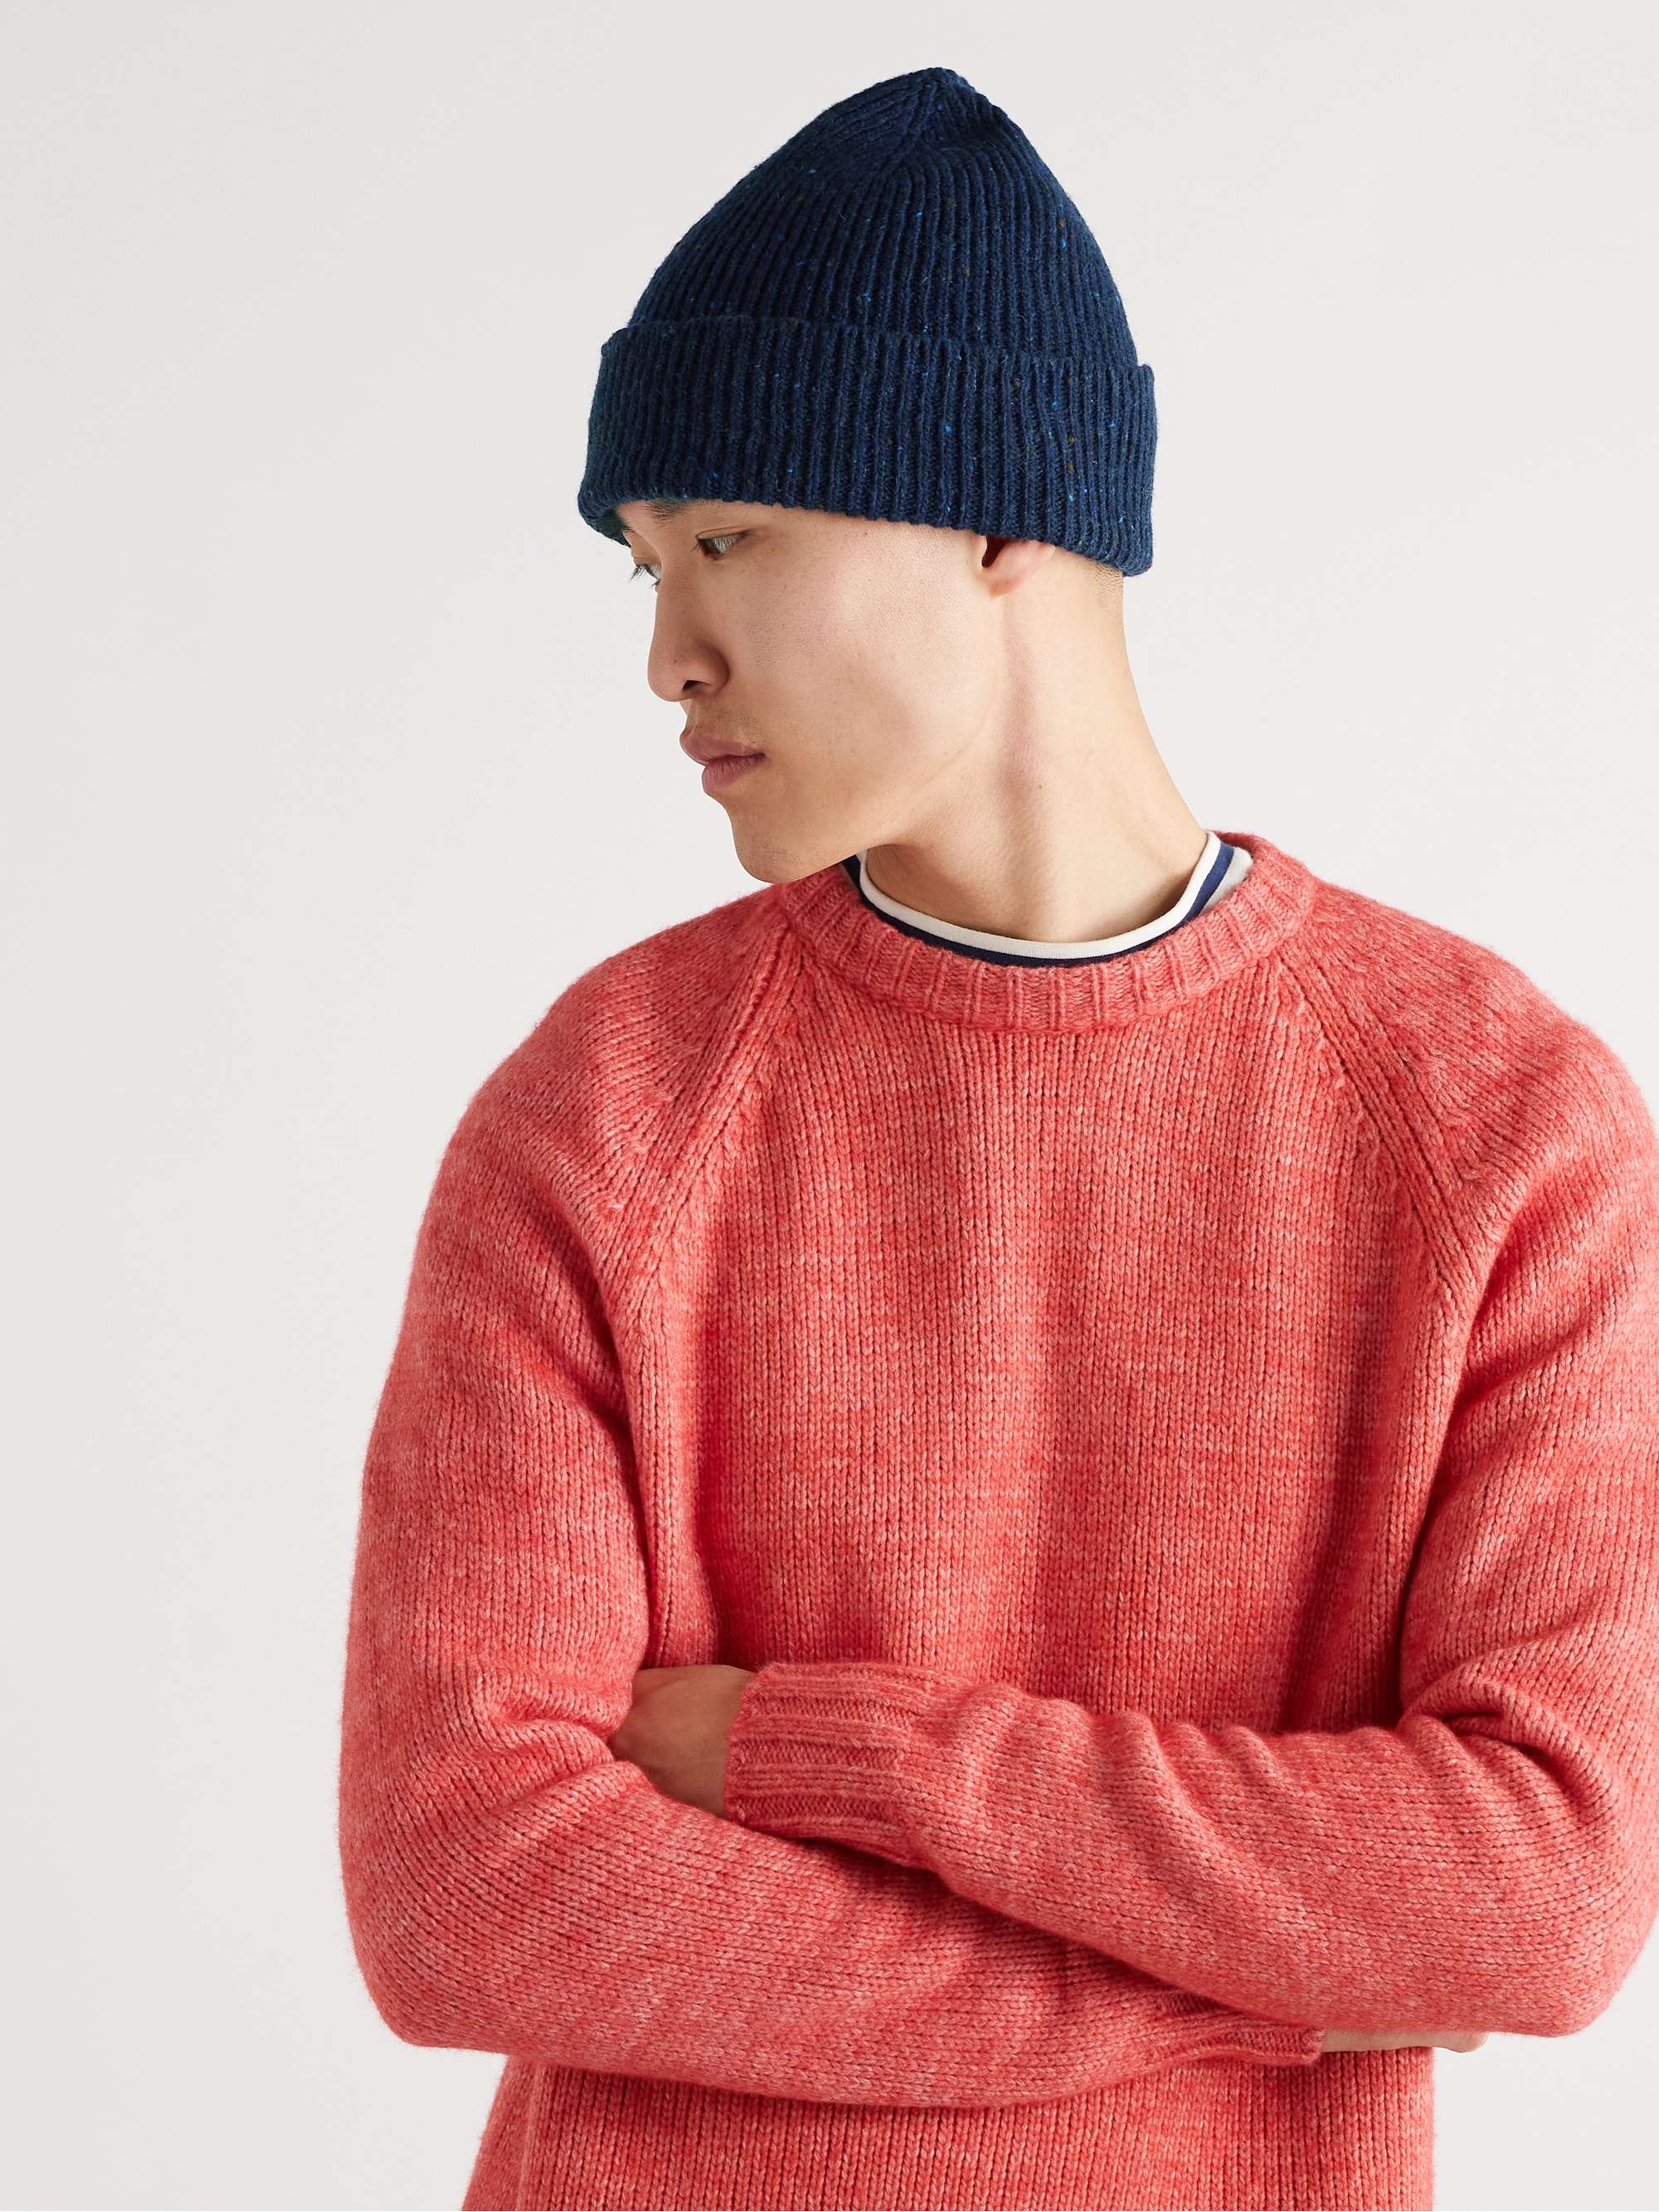 MR P. Ribbed Donegal Wool Beanie